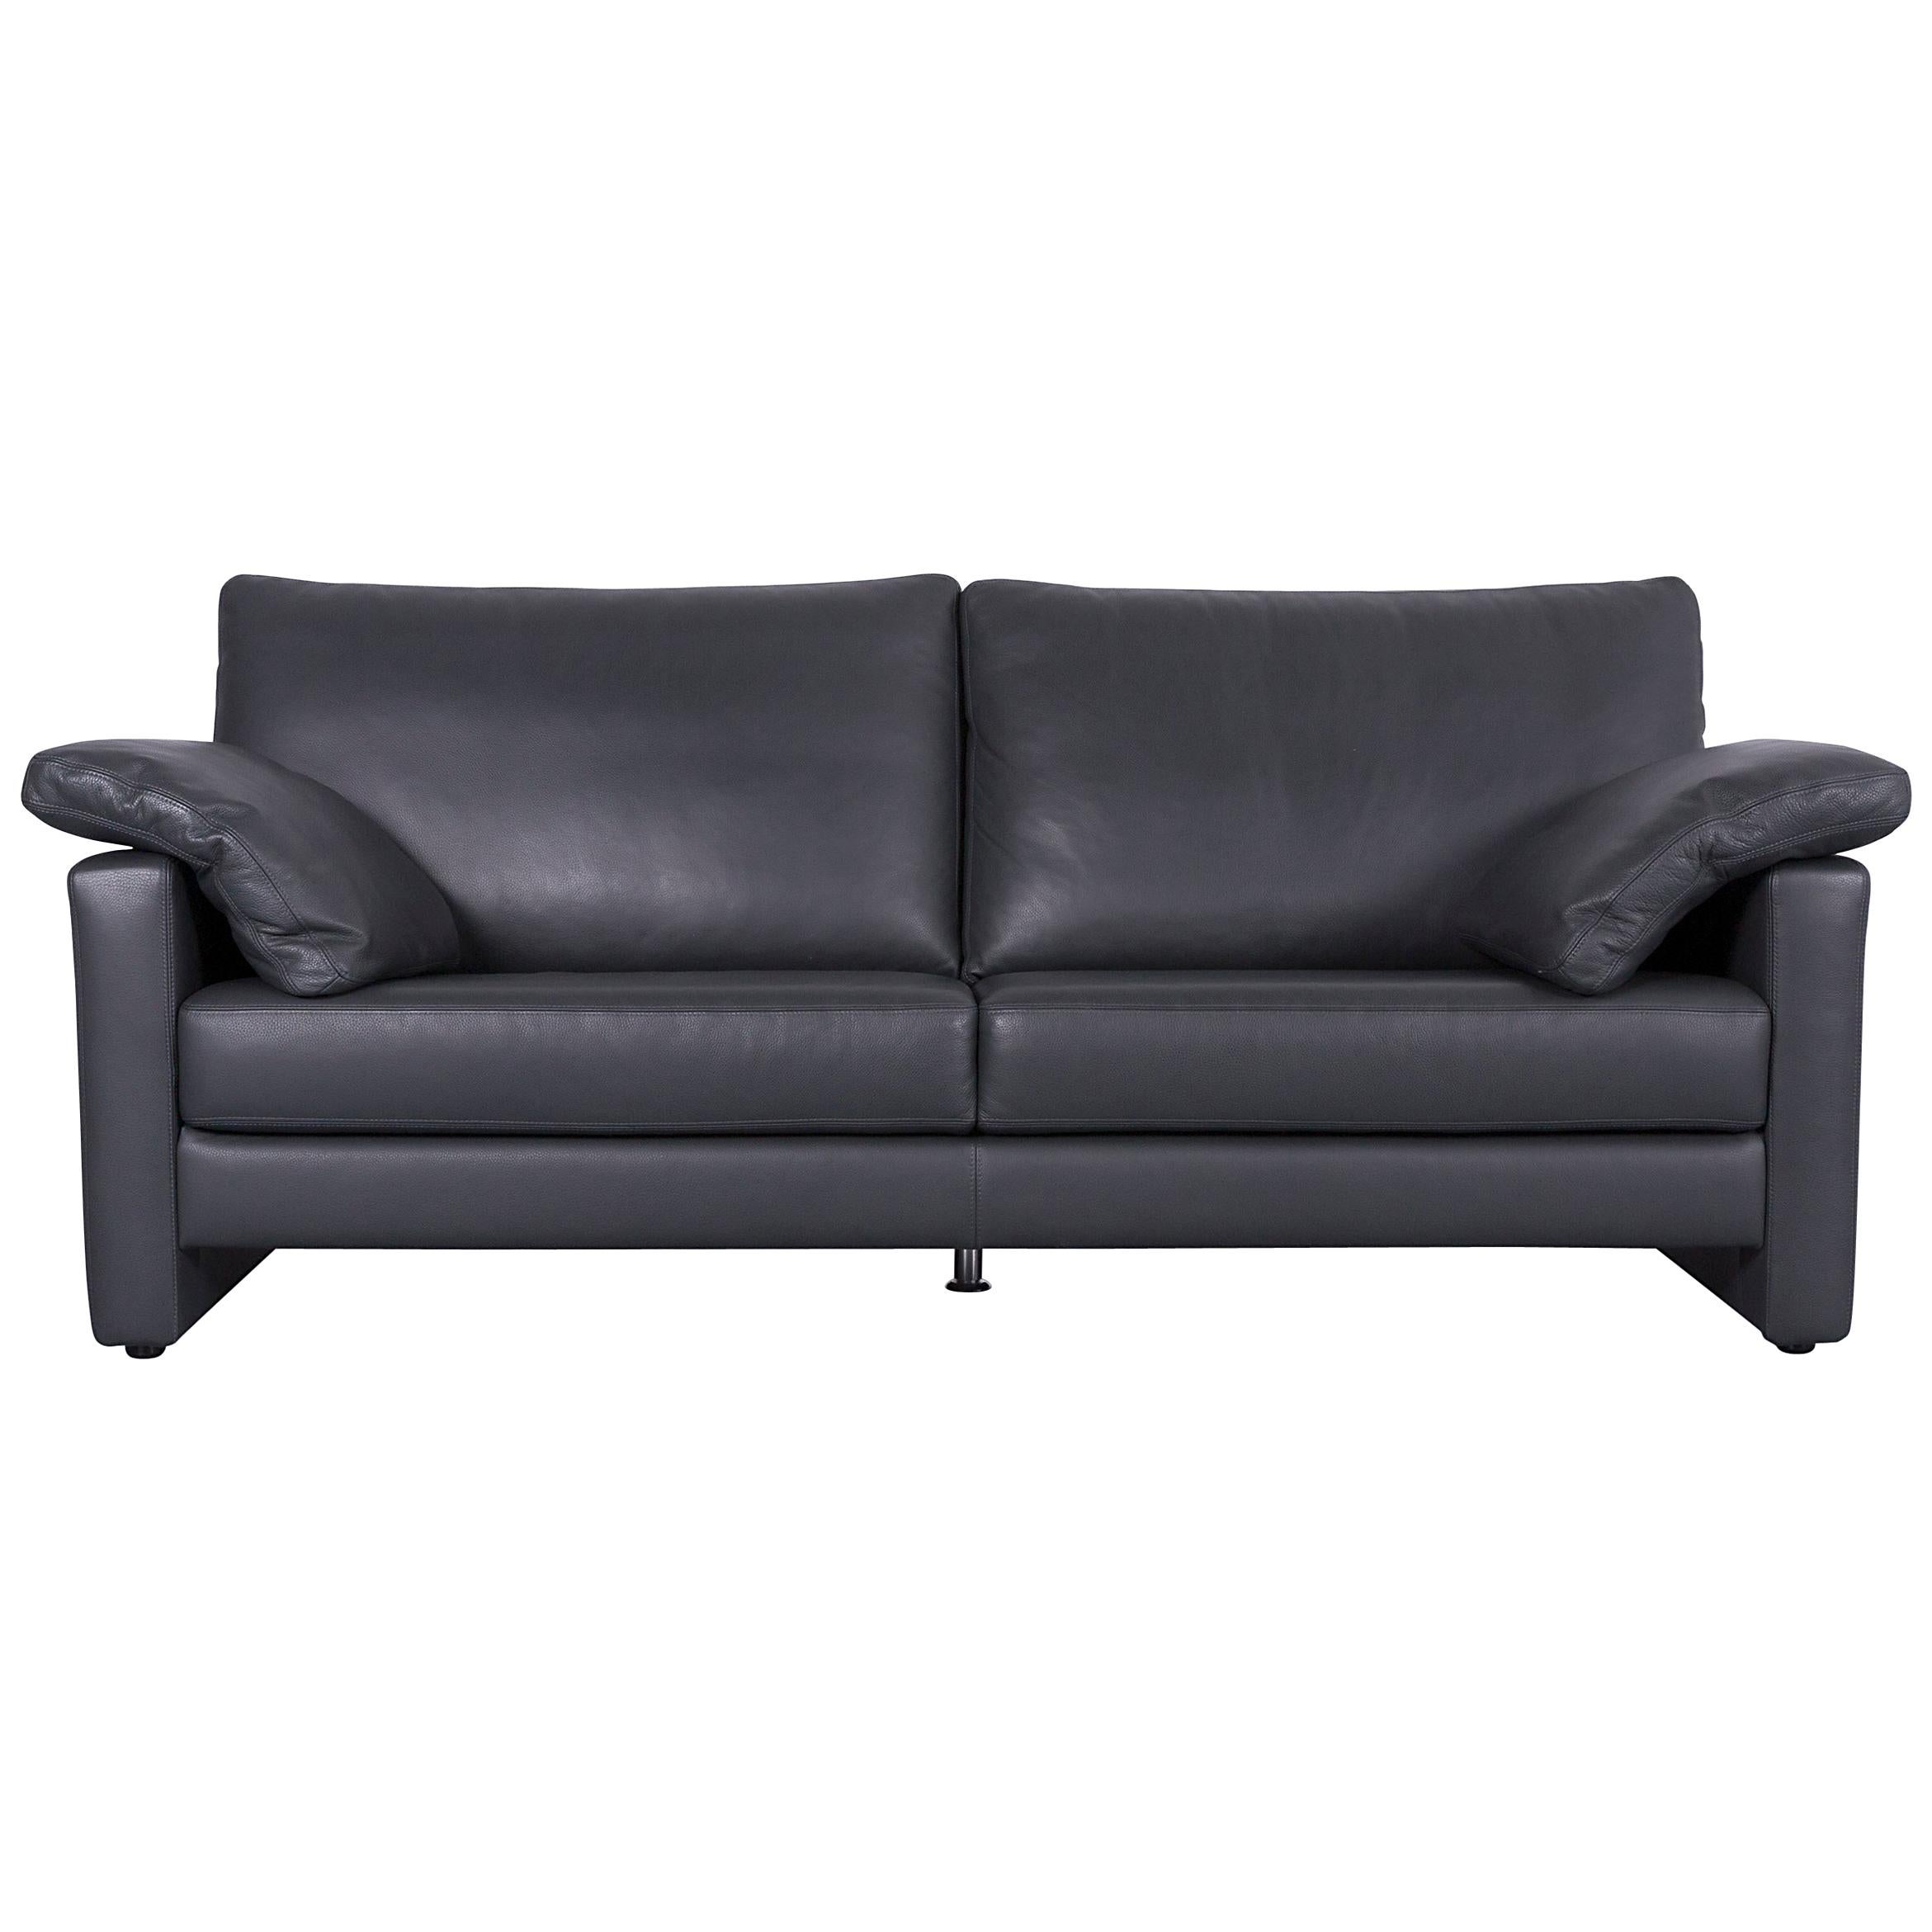 Musterring Designer Leather Sofa Black Three-Seat Couch